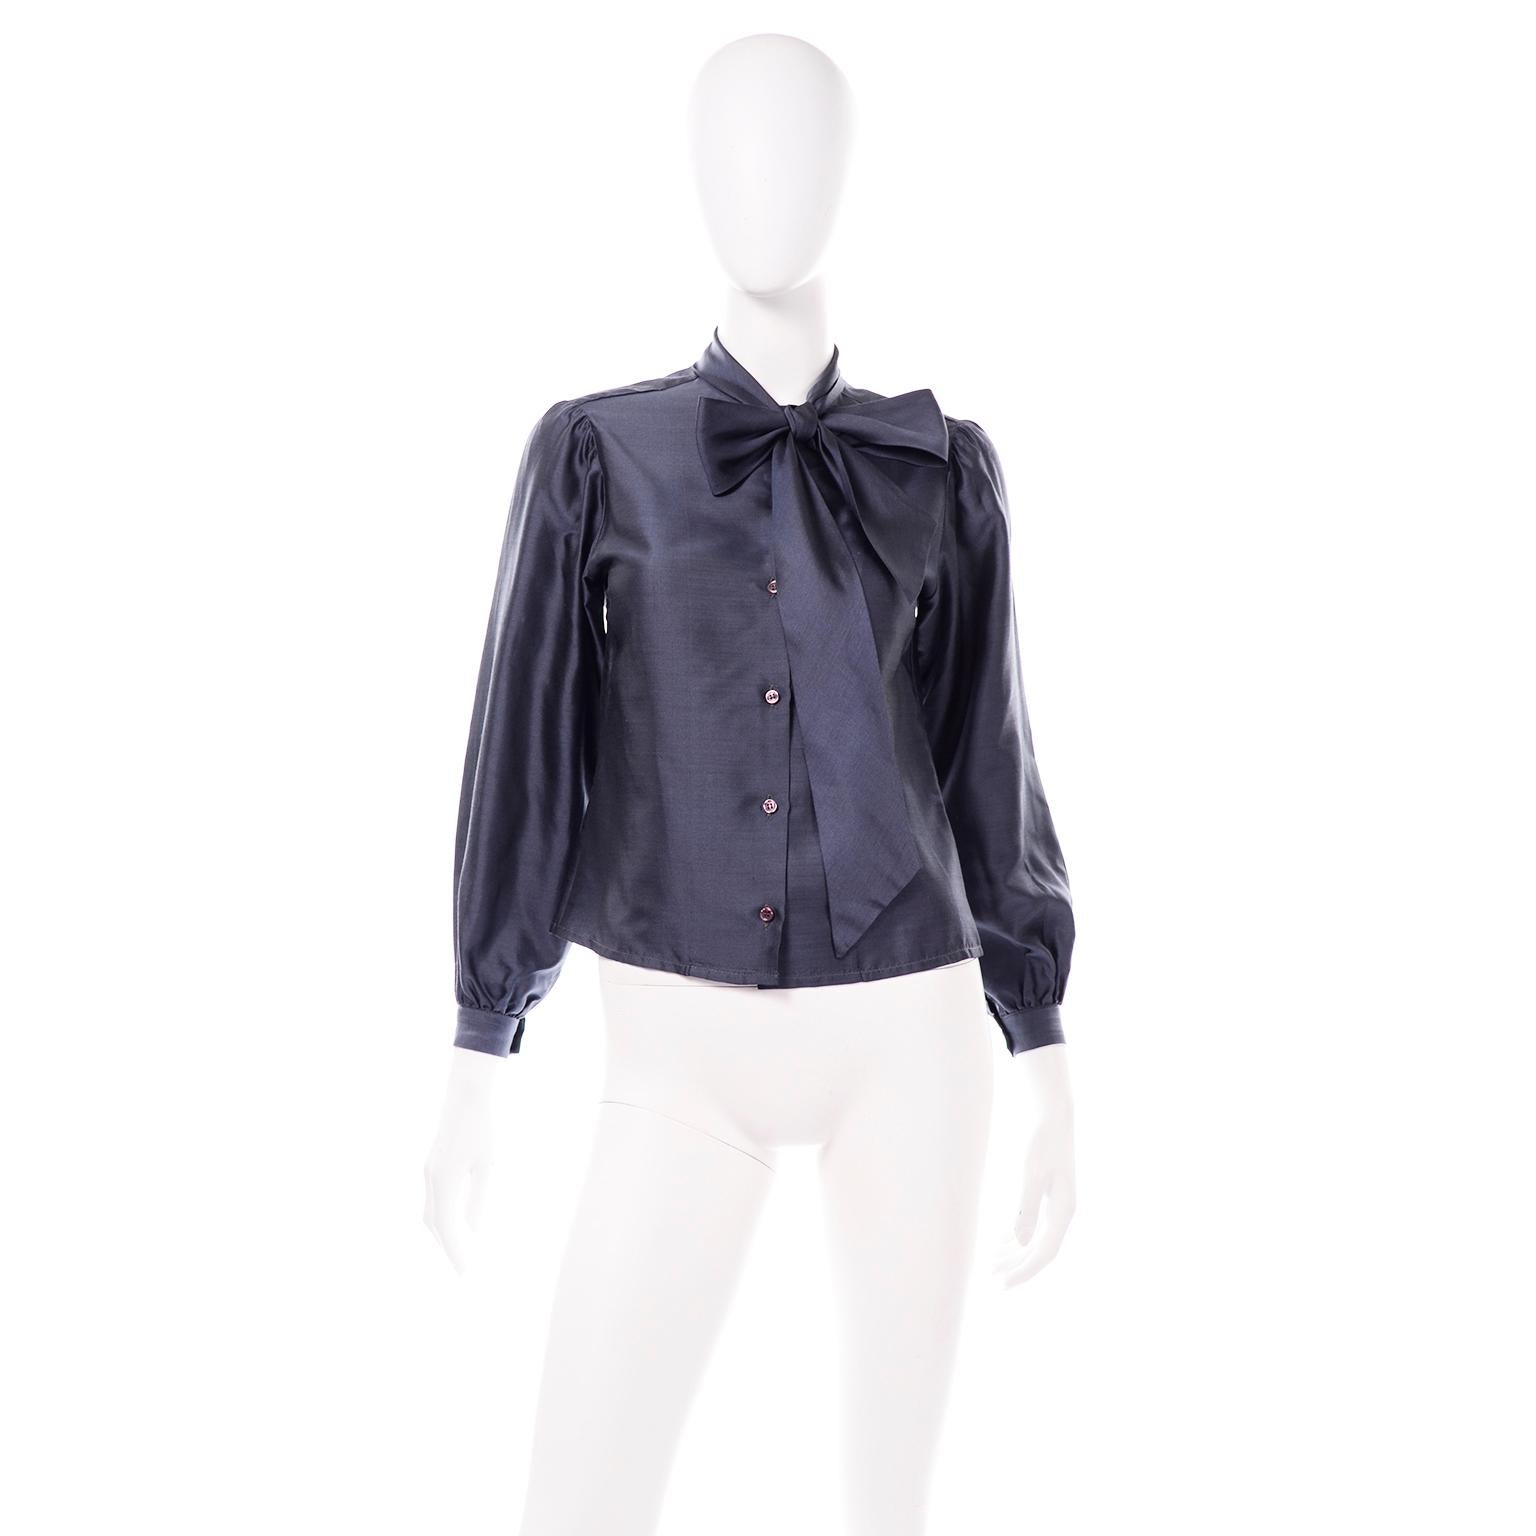 This vintage late 1970's Halston blouse is in a gorgeous blue polished cotton fabric. We love the tie that is attached to the collar that can be worn simply knotted or in a bow . The sleeves are balloon style with gathered fabric at the cuffs and